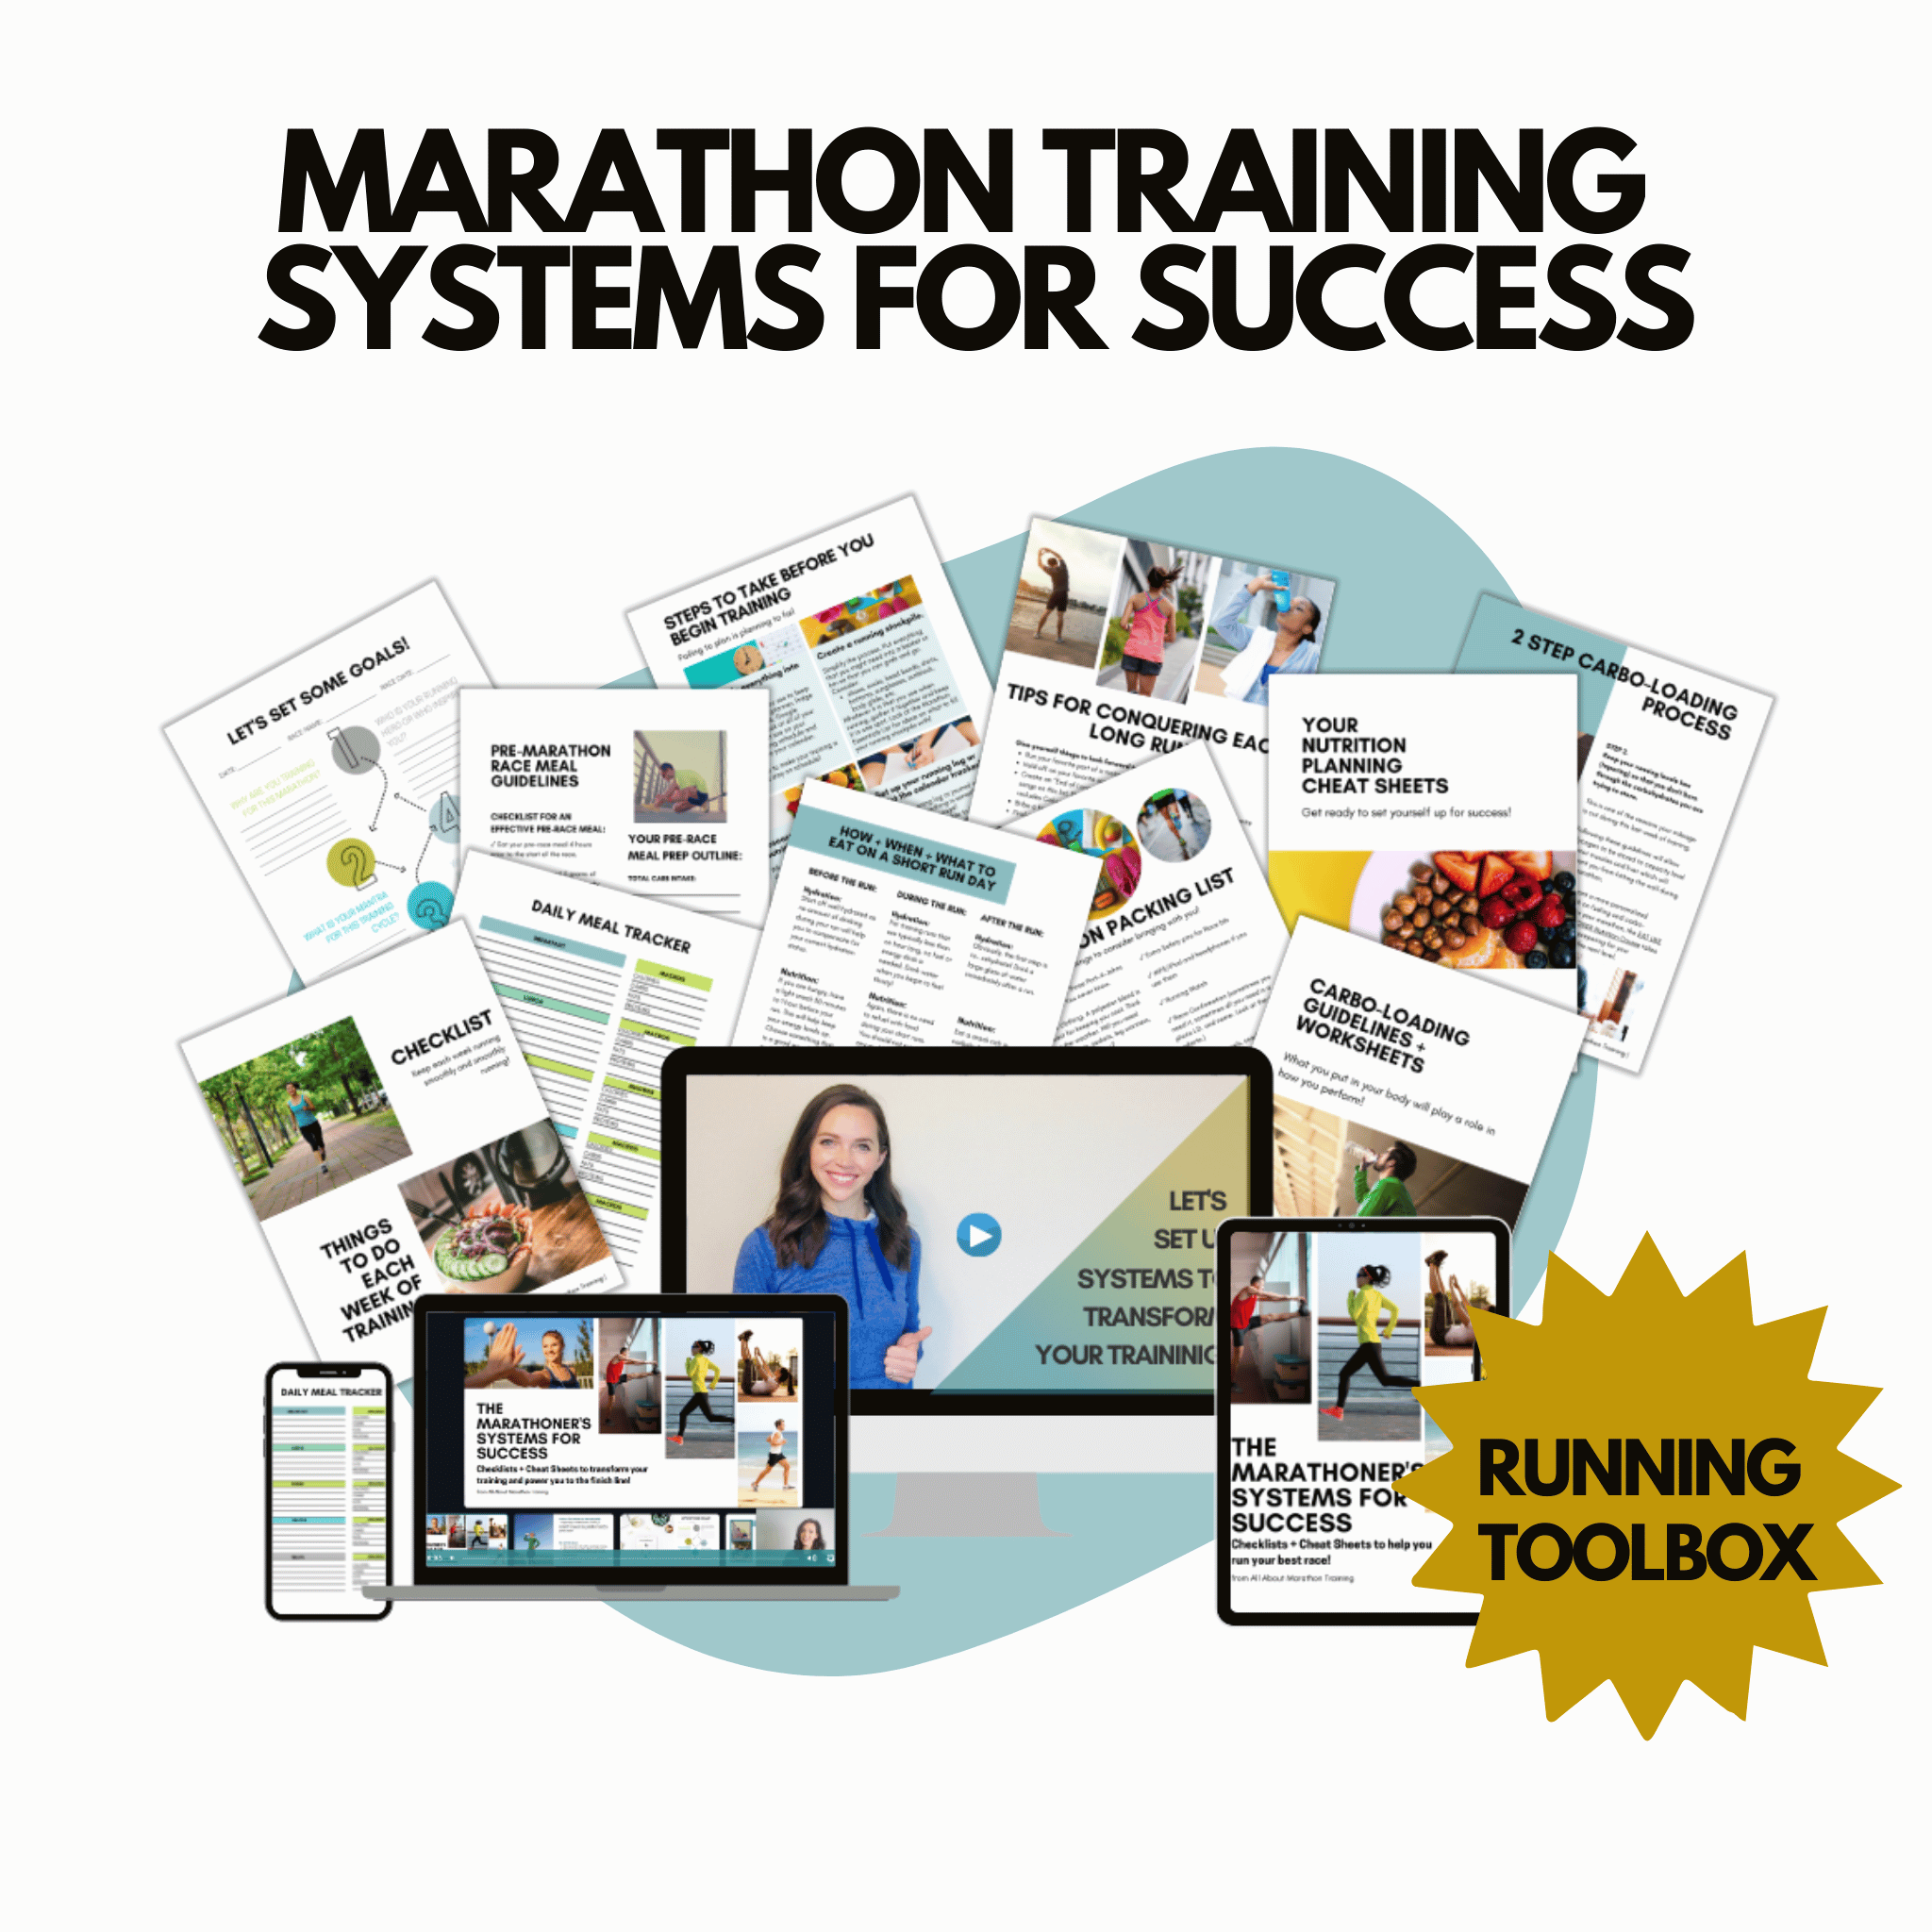 Another mockup of the Marathon Training Systems for Success Marathon Training Guide